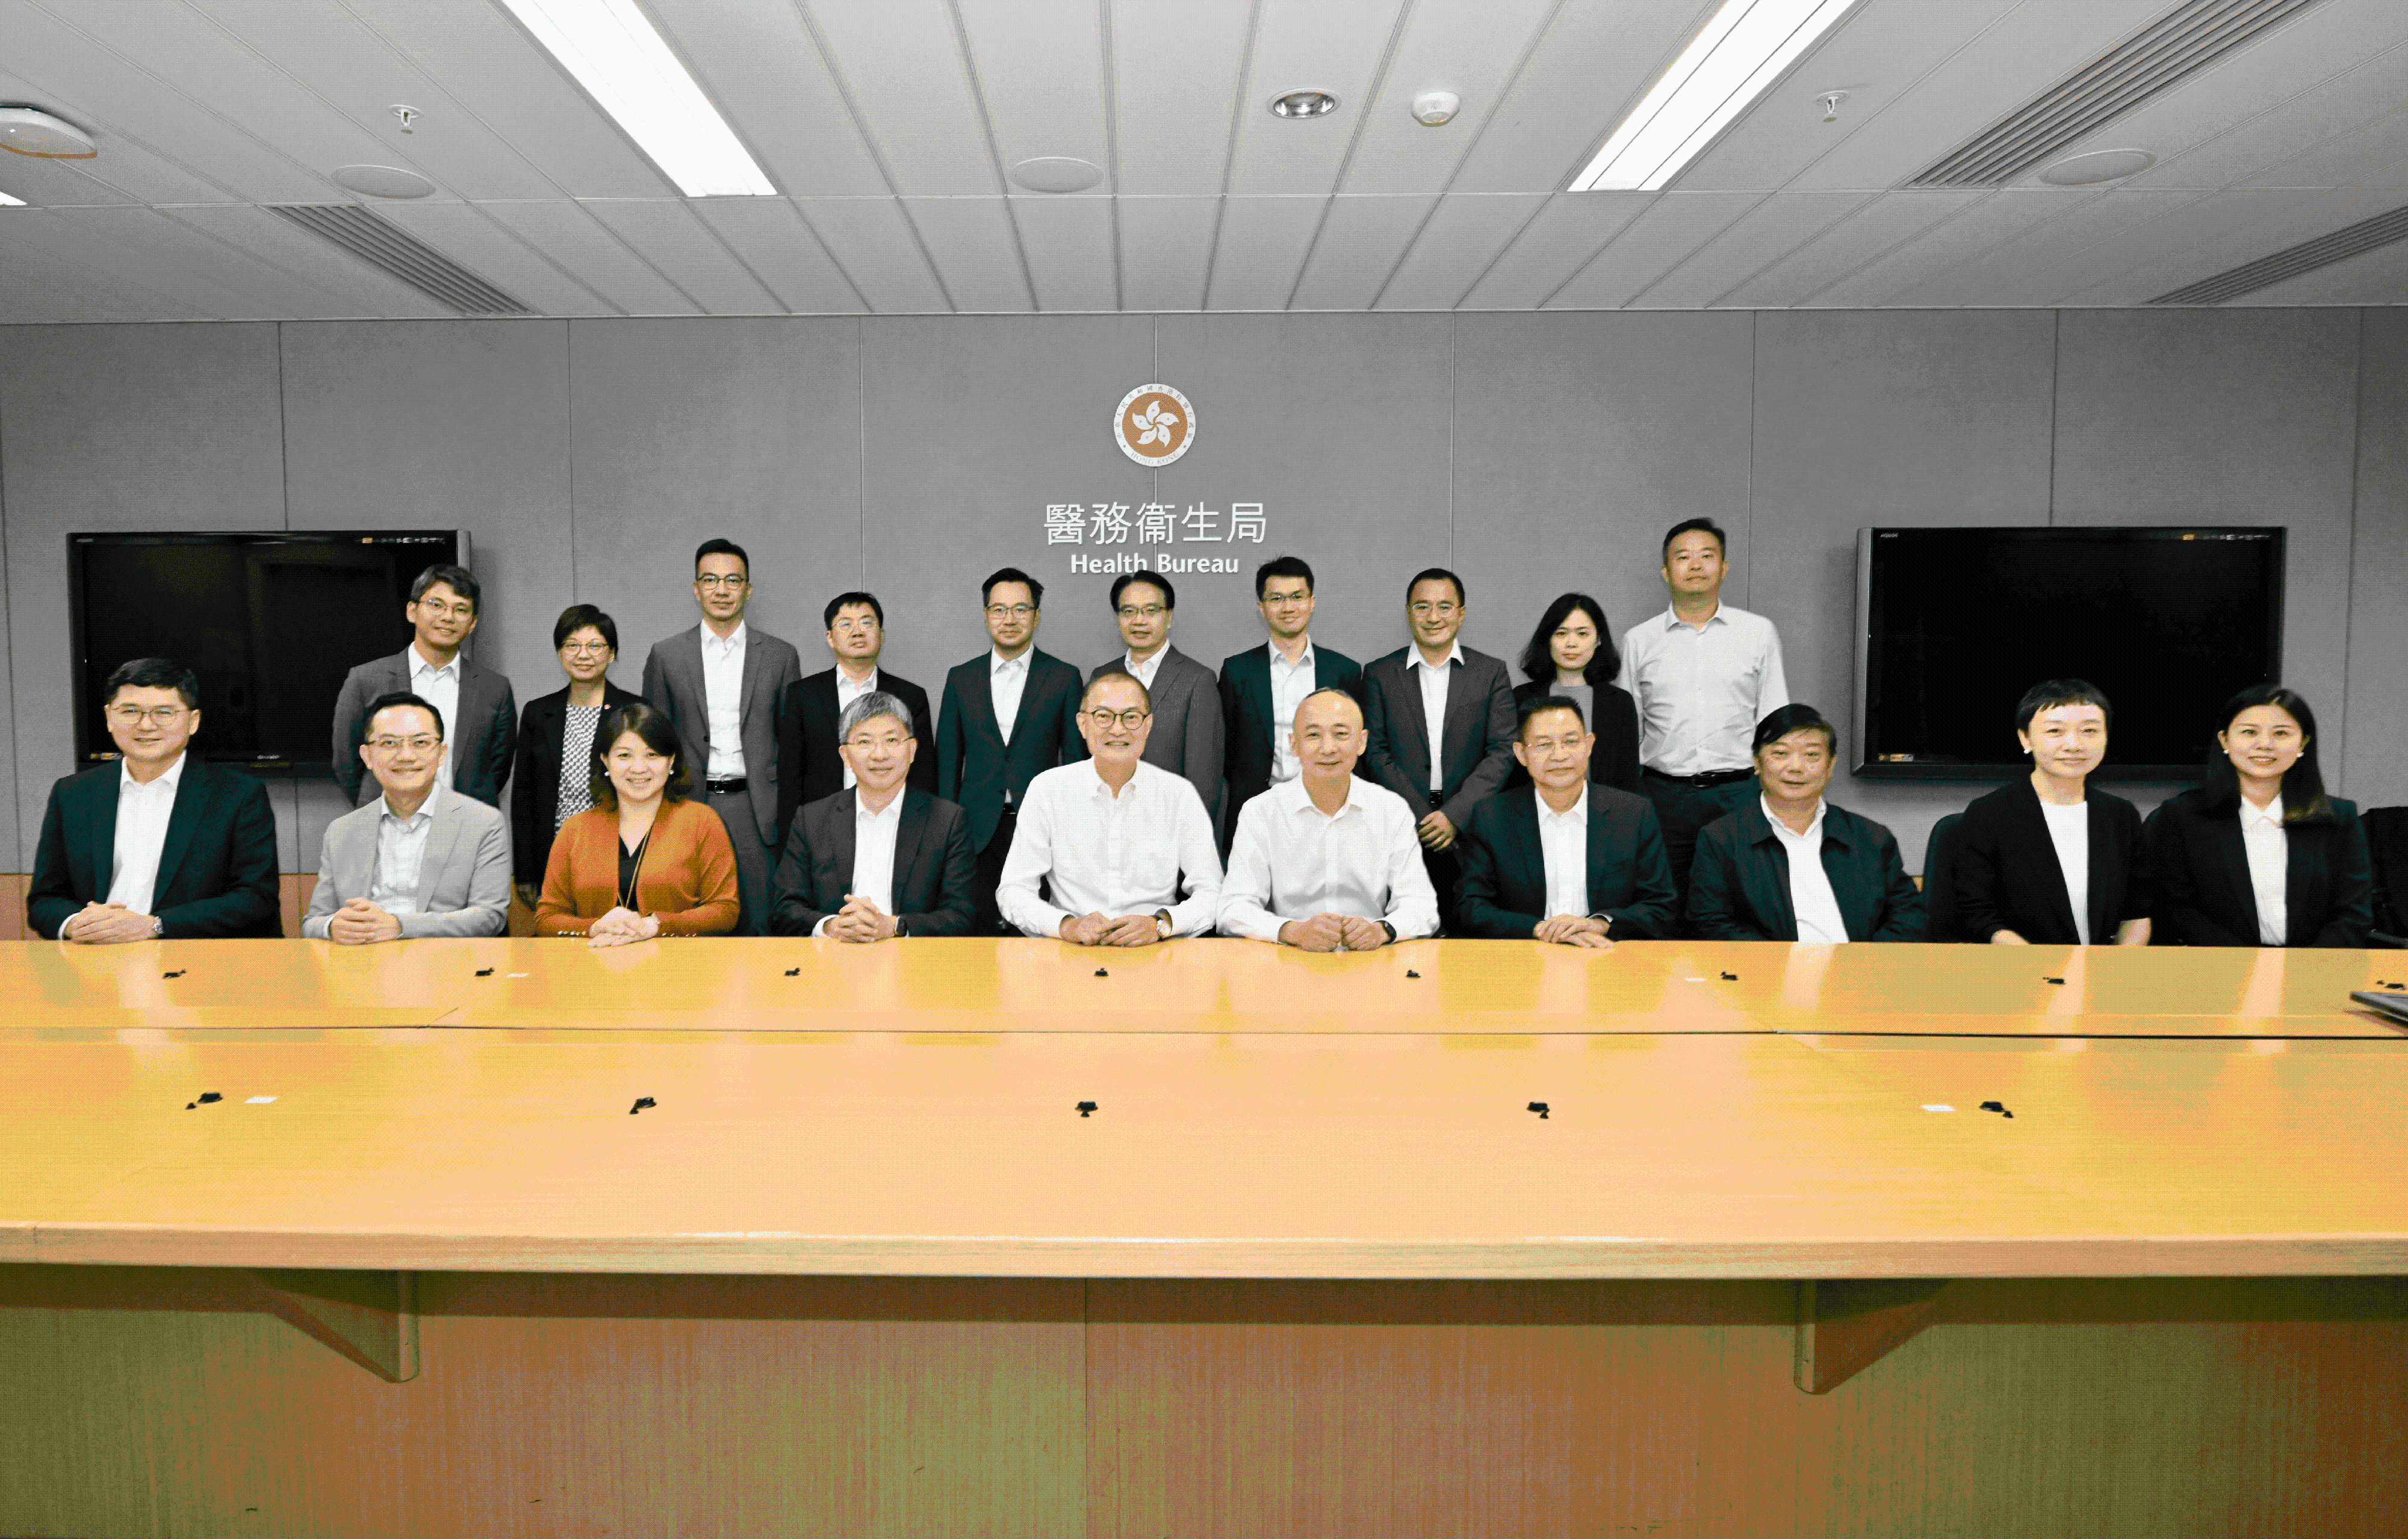 The Secretary for Health, Professor Lo Chung-mau, meets with a delegation led by the Director of Sichuan Provincial Administration of Traditional Chinese Medicine, Mr Tian Xingjun, today (October 30). Photo shows Professor Lo (front row, fifth left); Mr Tian (front row, fifth right); the Permanent Secretary for Health, Mr Thomas Chan (front row, fourth left); the Under Secretary for Health, Dr Libby Lee (front row, third left); the Director of Health, Dr Ronald Lam (front row, second left); the Chief Executive of the Hospital Authority, Dr Tony Ko (front row, first left), and other attendees of the meeting.